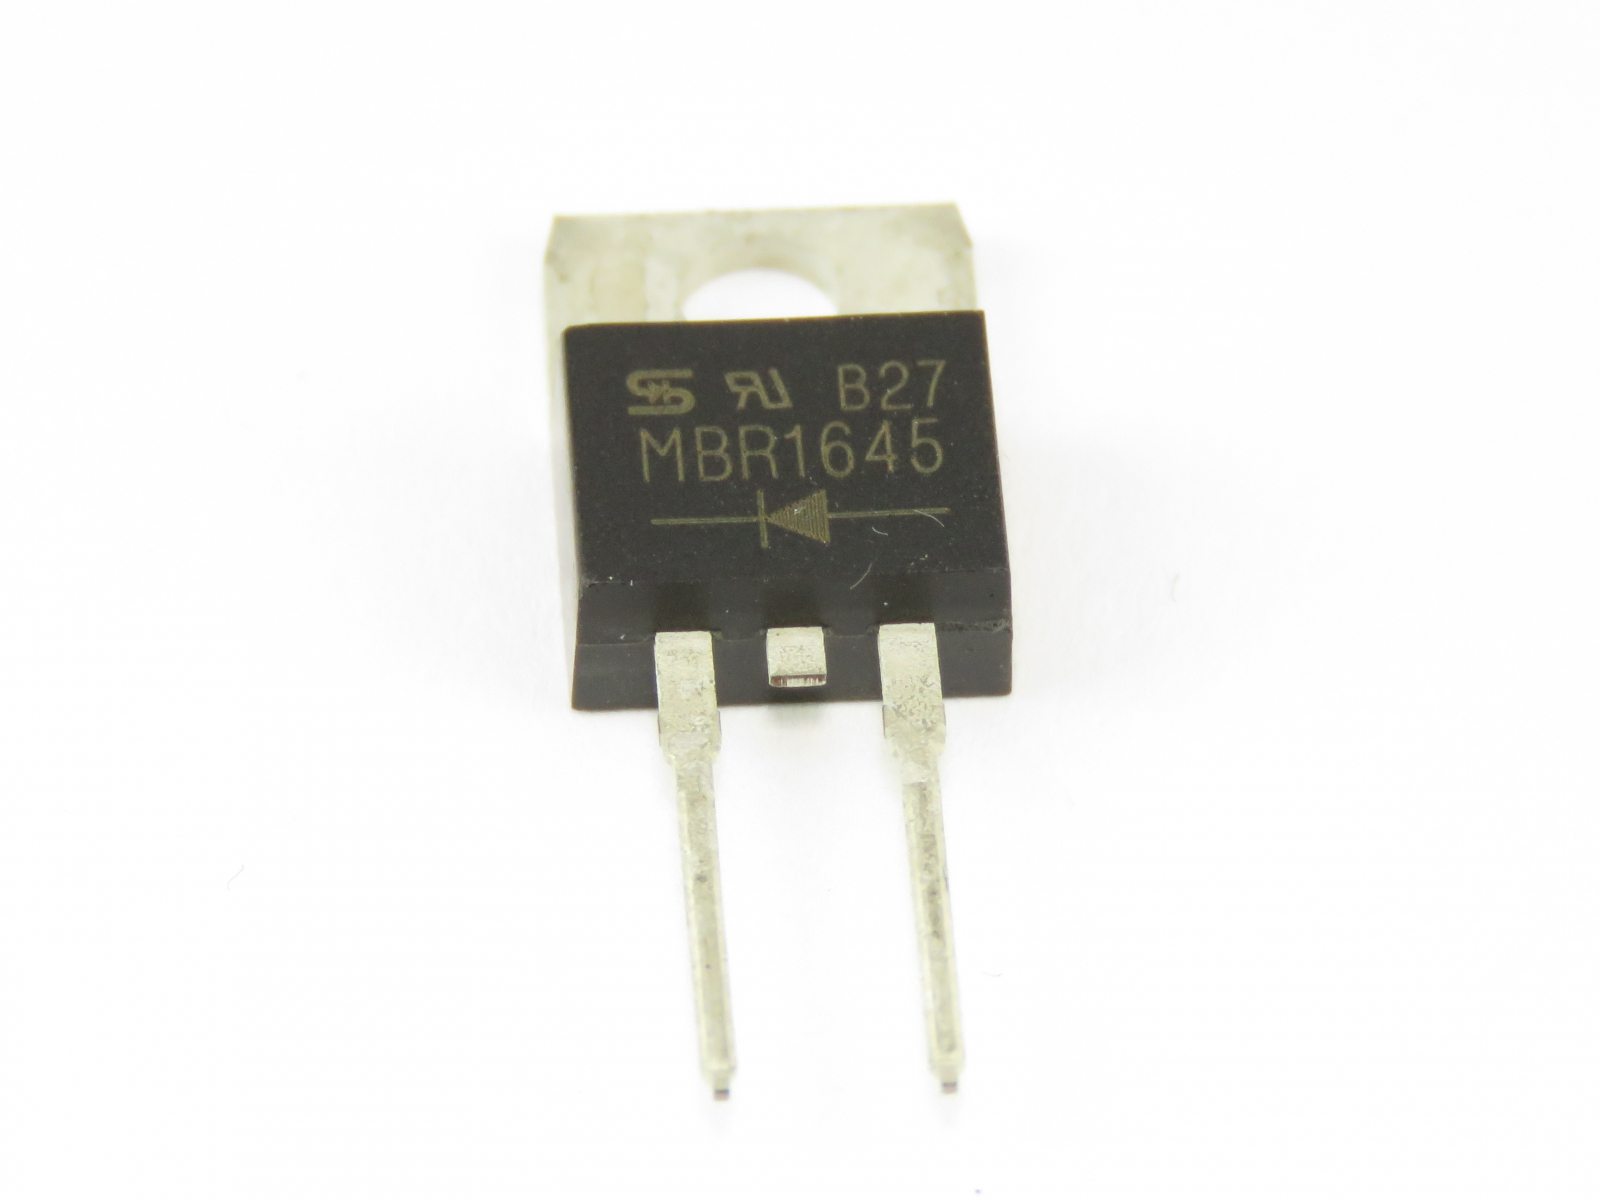 Diode MBR1645